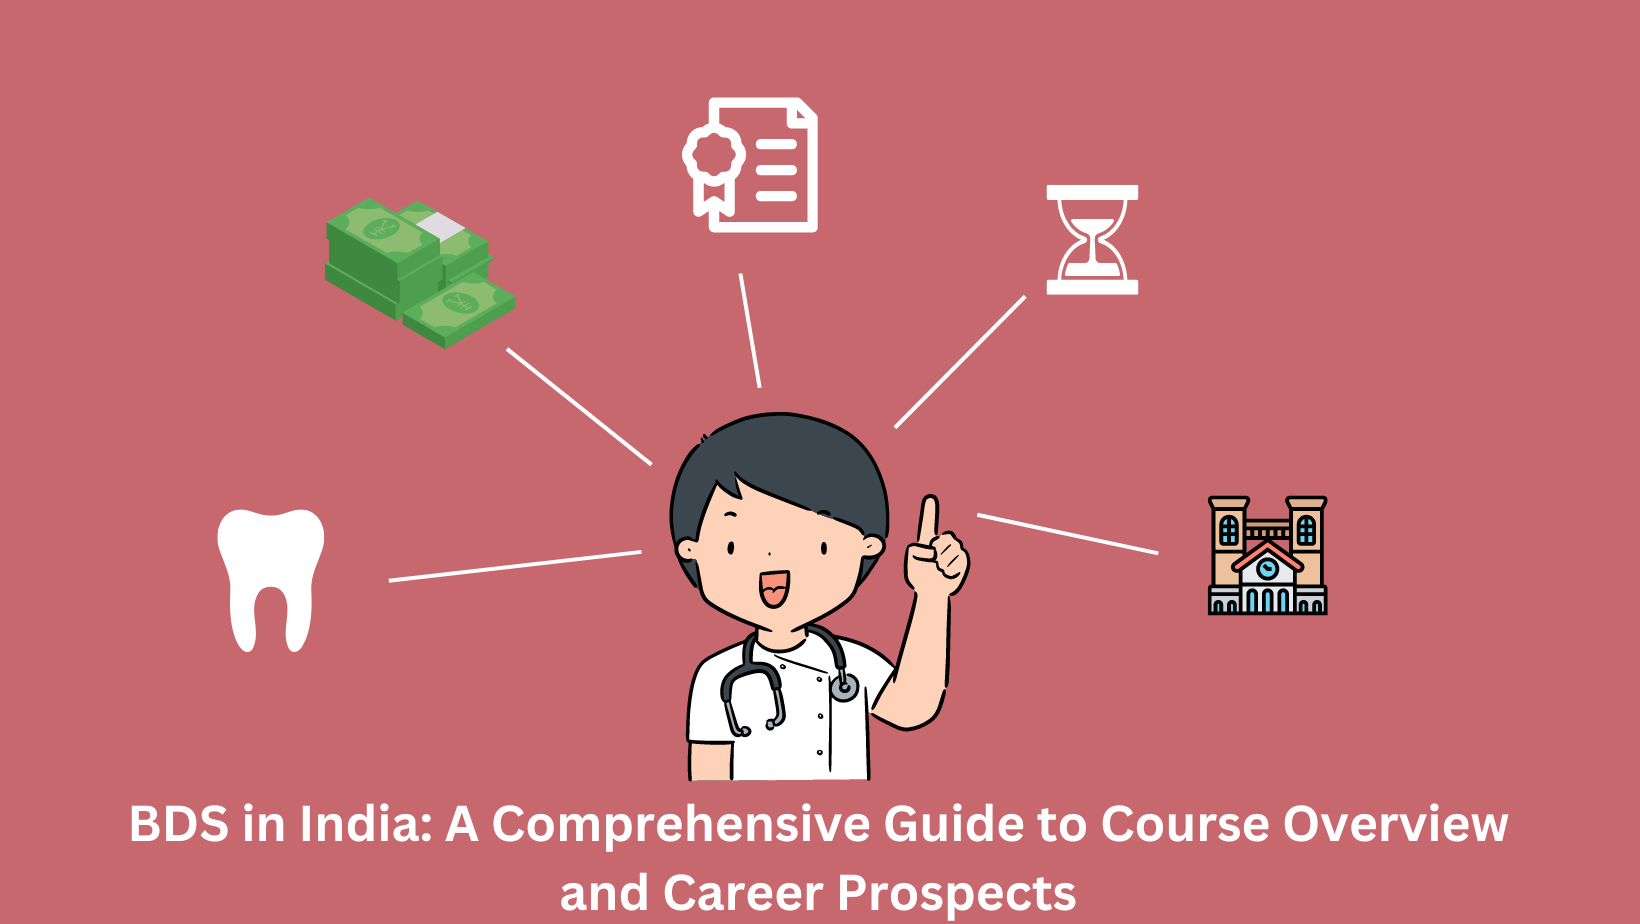 BDS in India: A Comprehensive Guide to Course Overview and Career Prospects